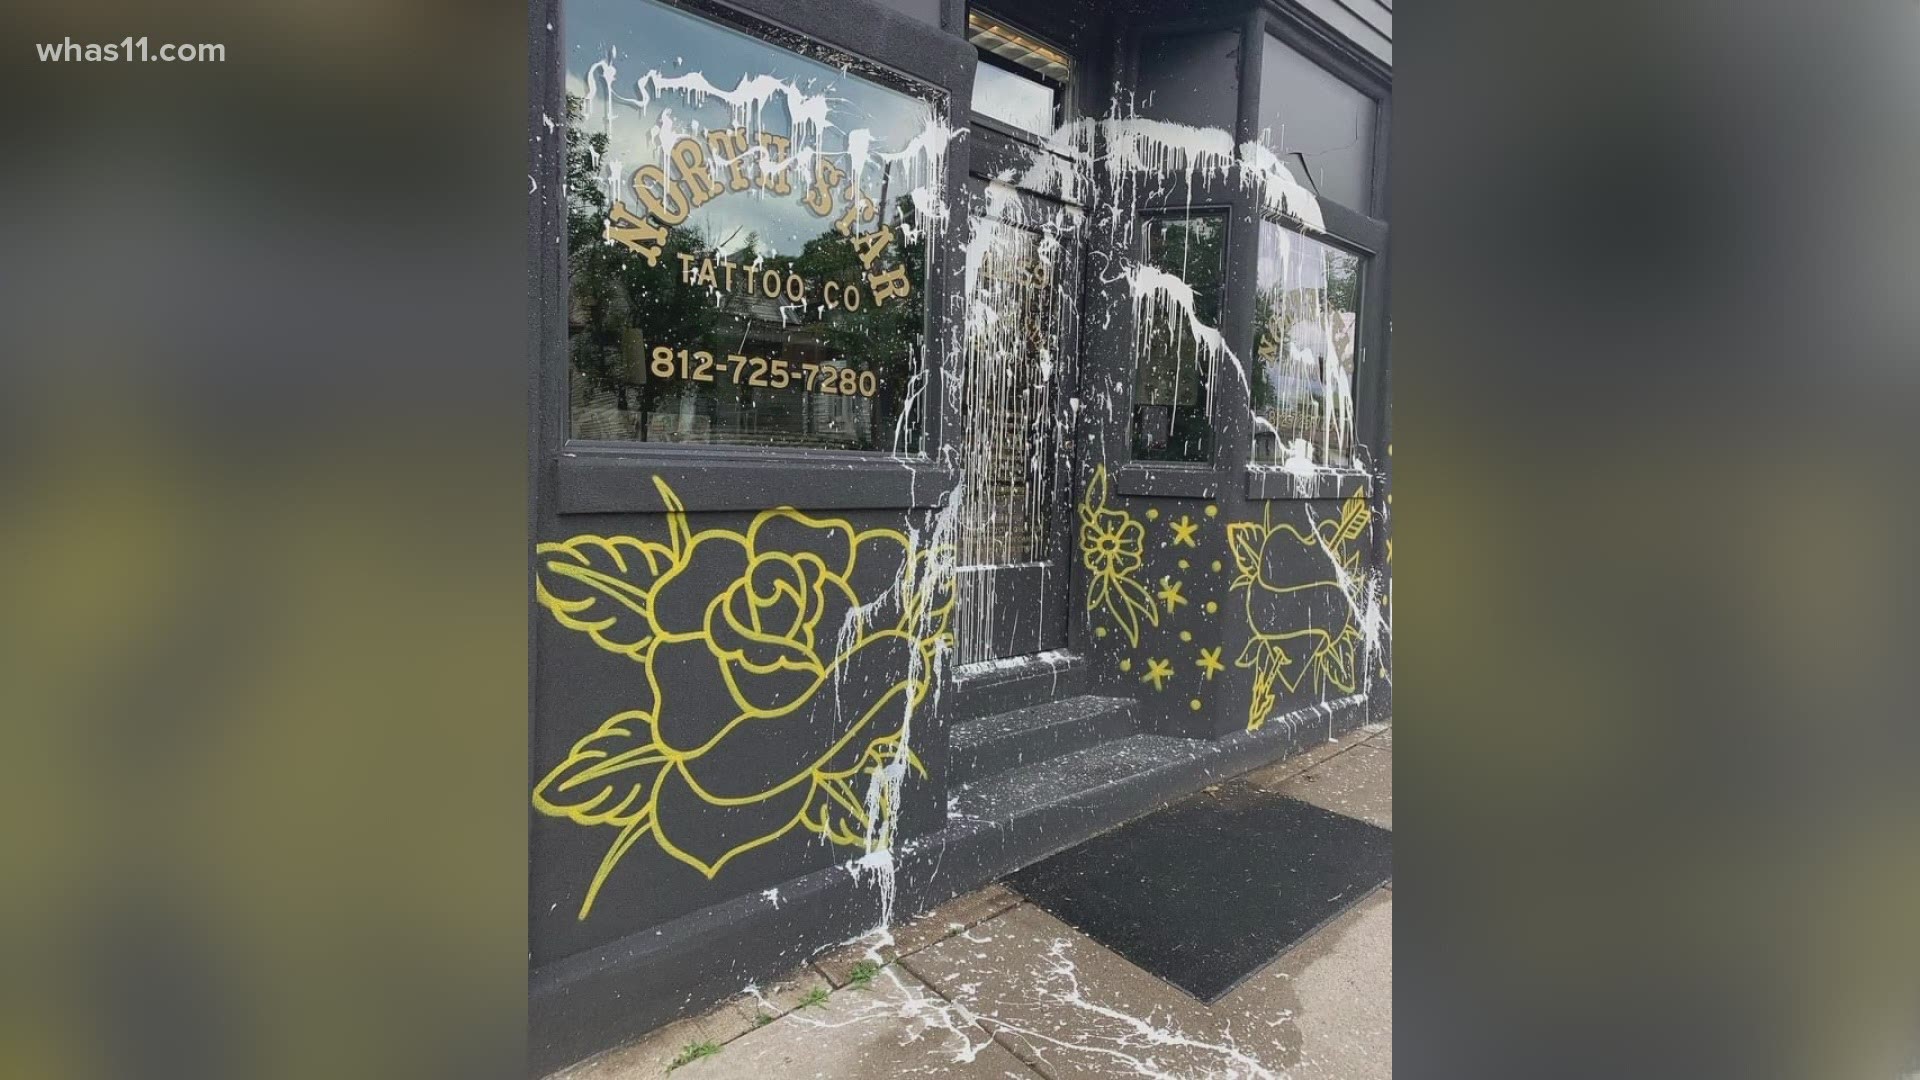 The North Star Tattoo Shop owner in New Albany wants help finding the culprit who threw paint on the building. Video captured the moment.